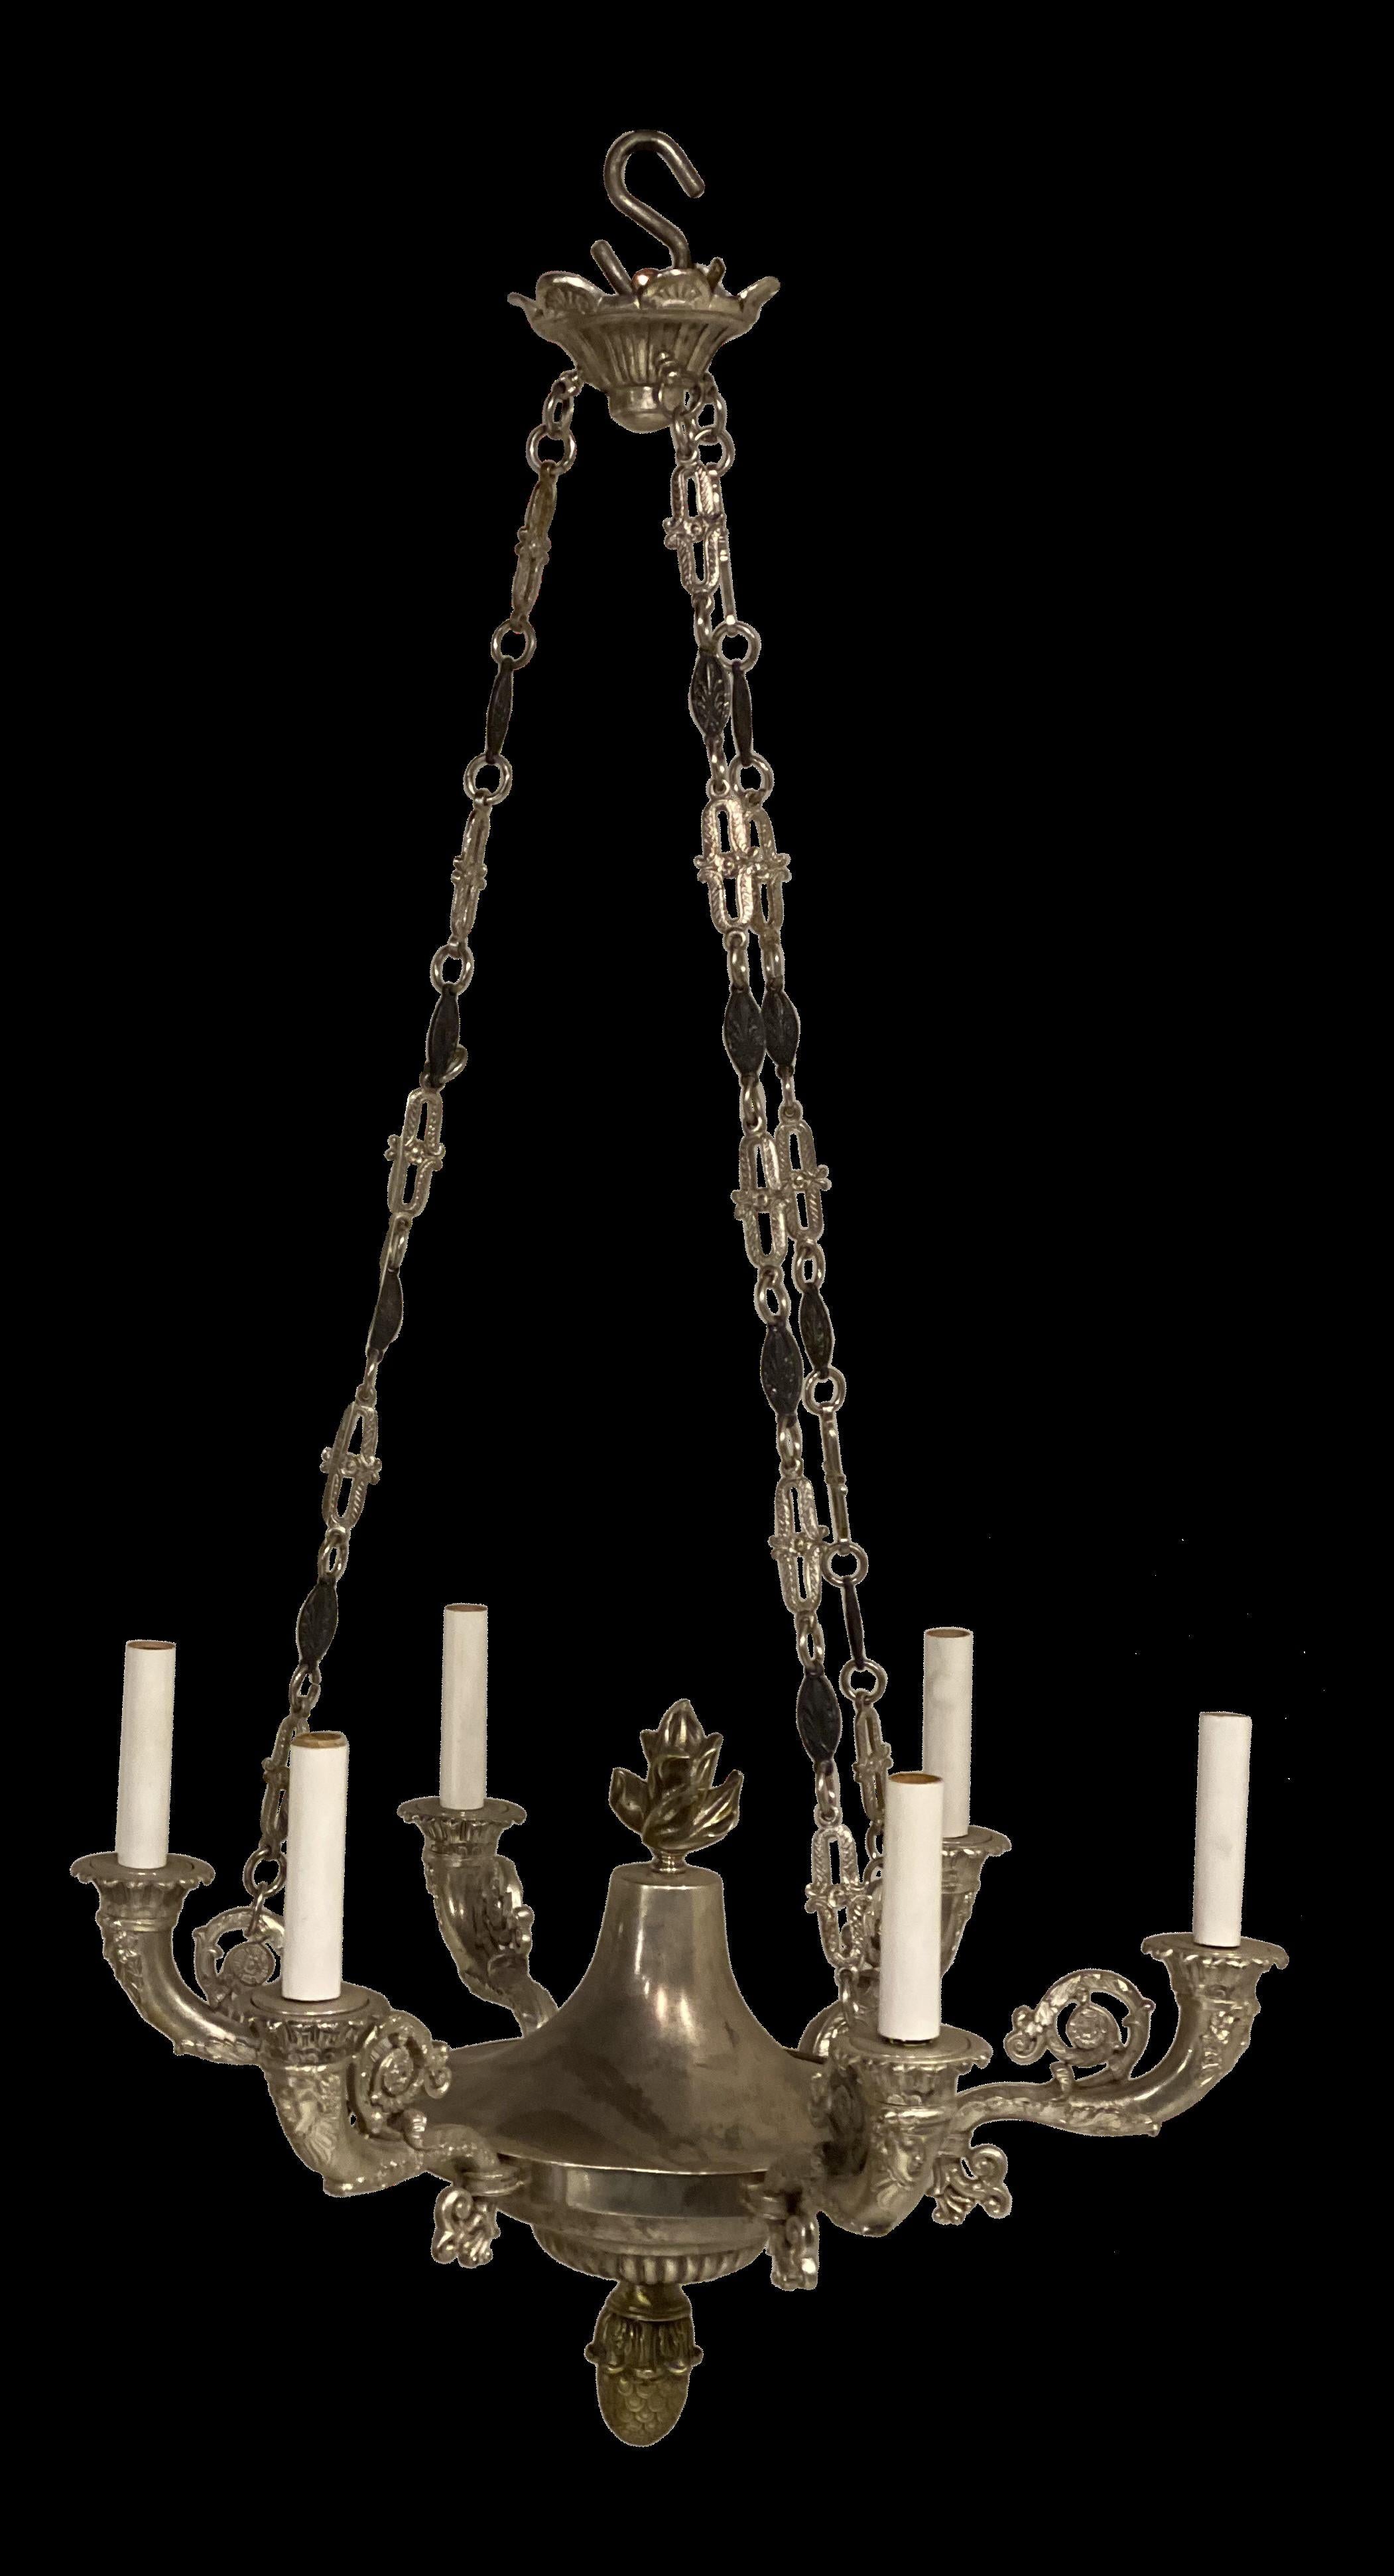 A circa 1930's French silver plated finish empire style chandelier with 6 lights